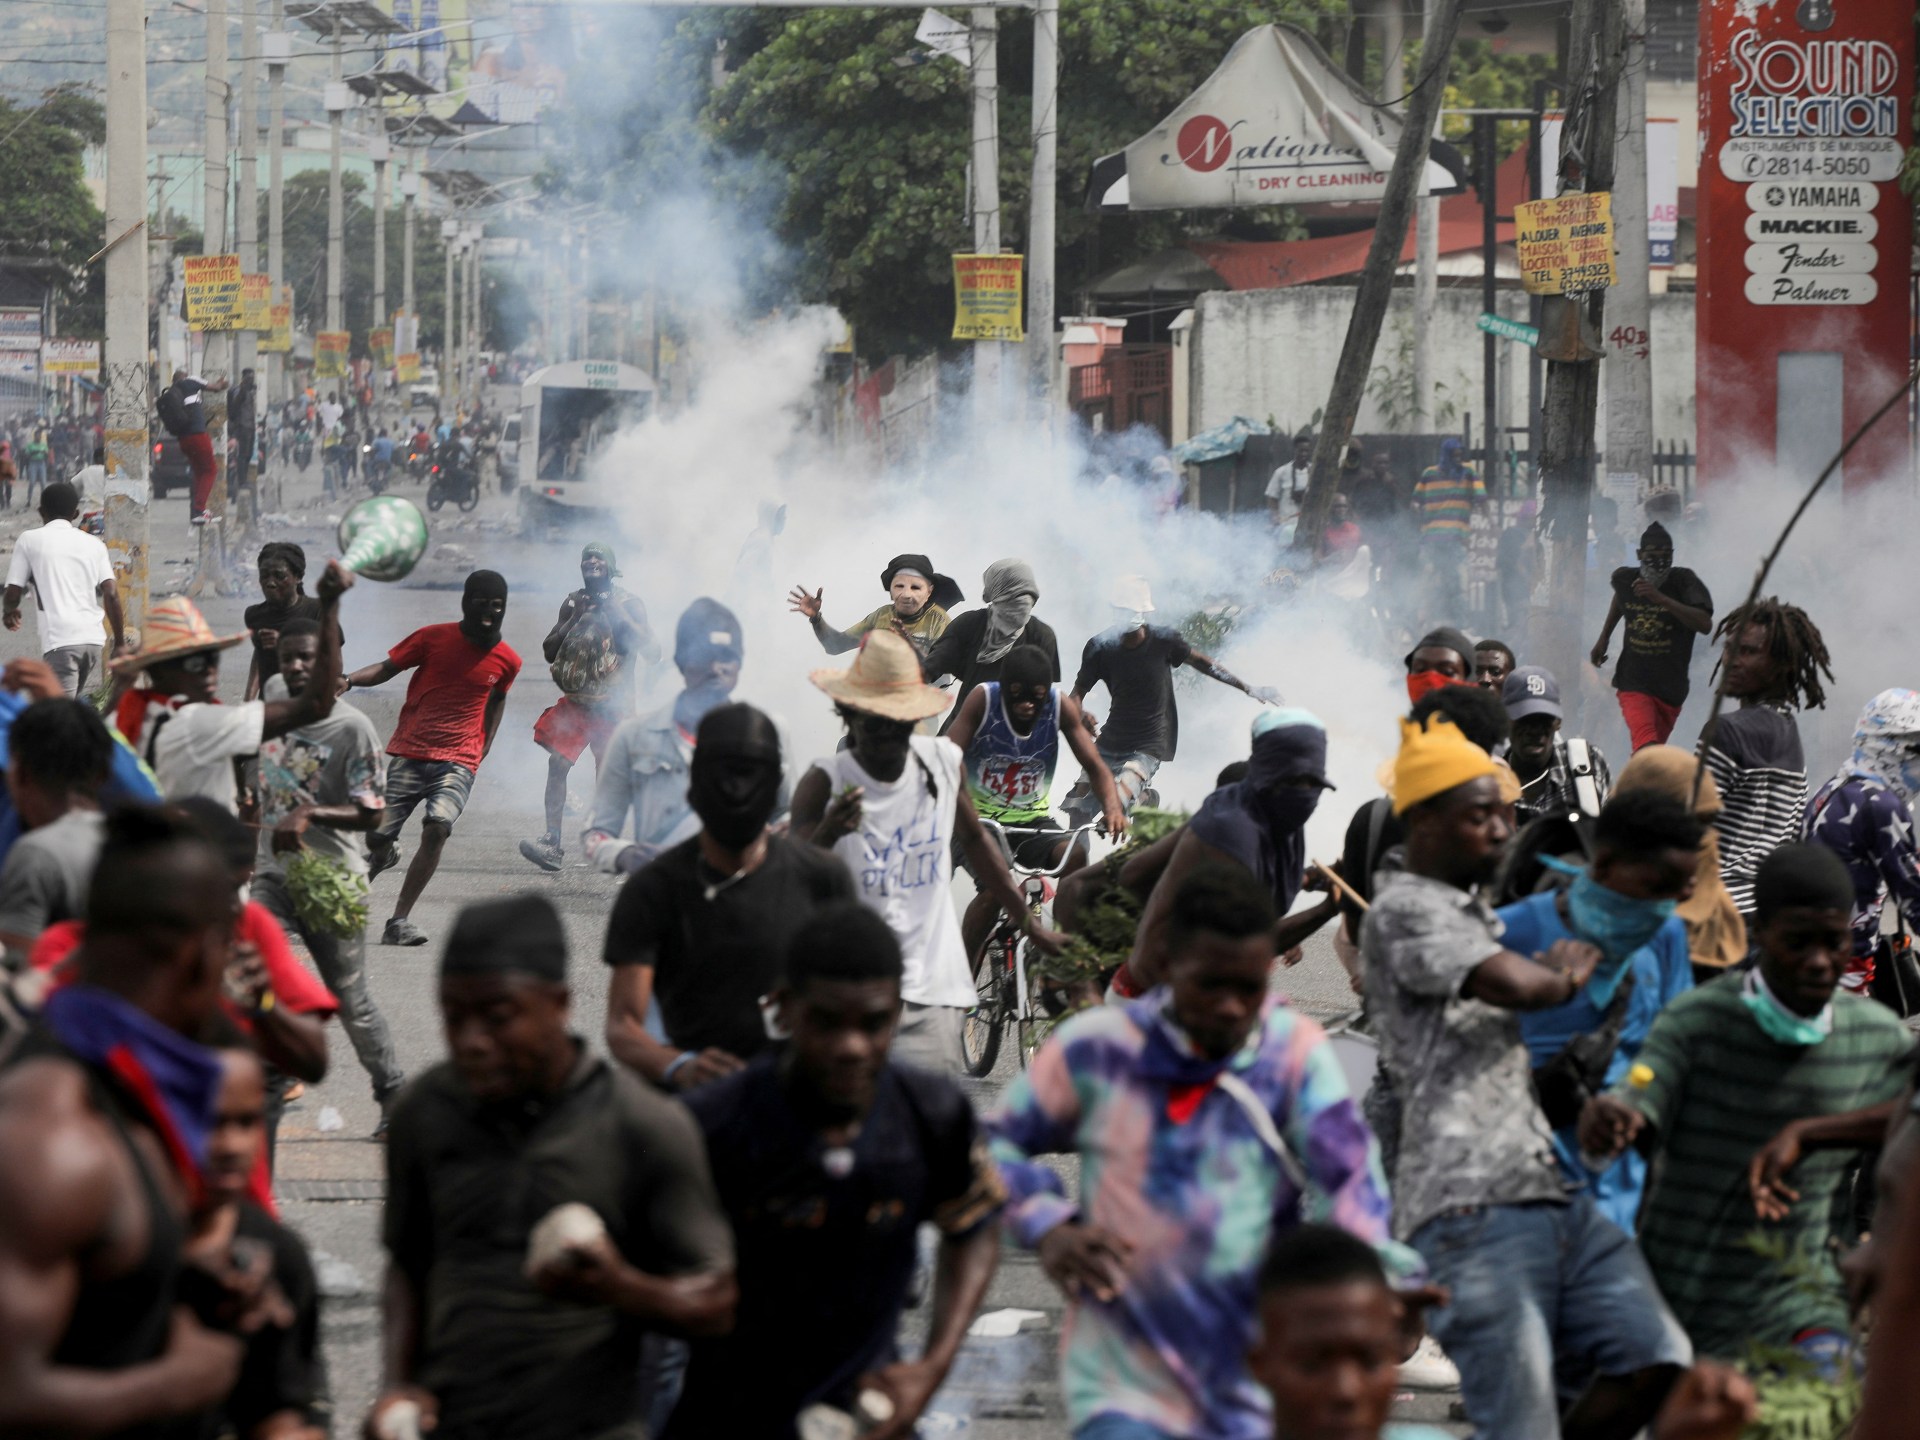 Haitians protest against government call for foreign forces | Protests News | Al Jazeera